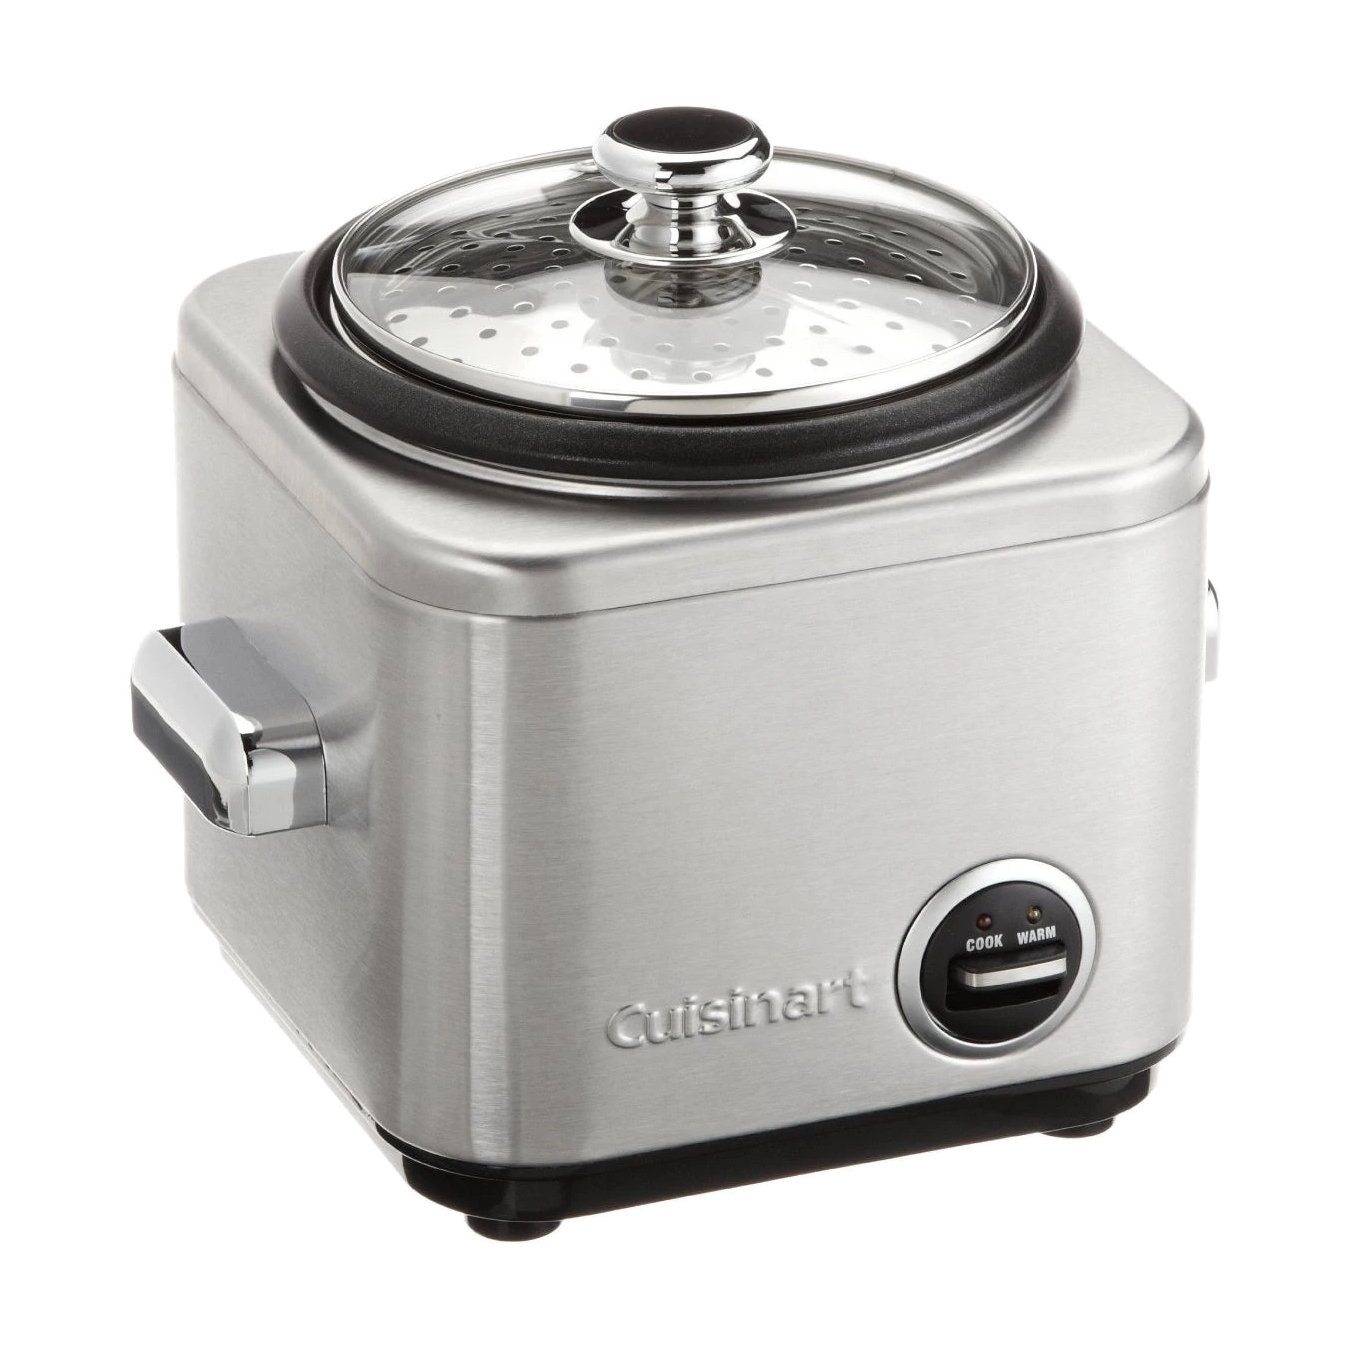 How Long To Cook Rice In A Cuisinart Rice Cooker